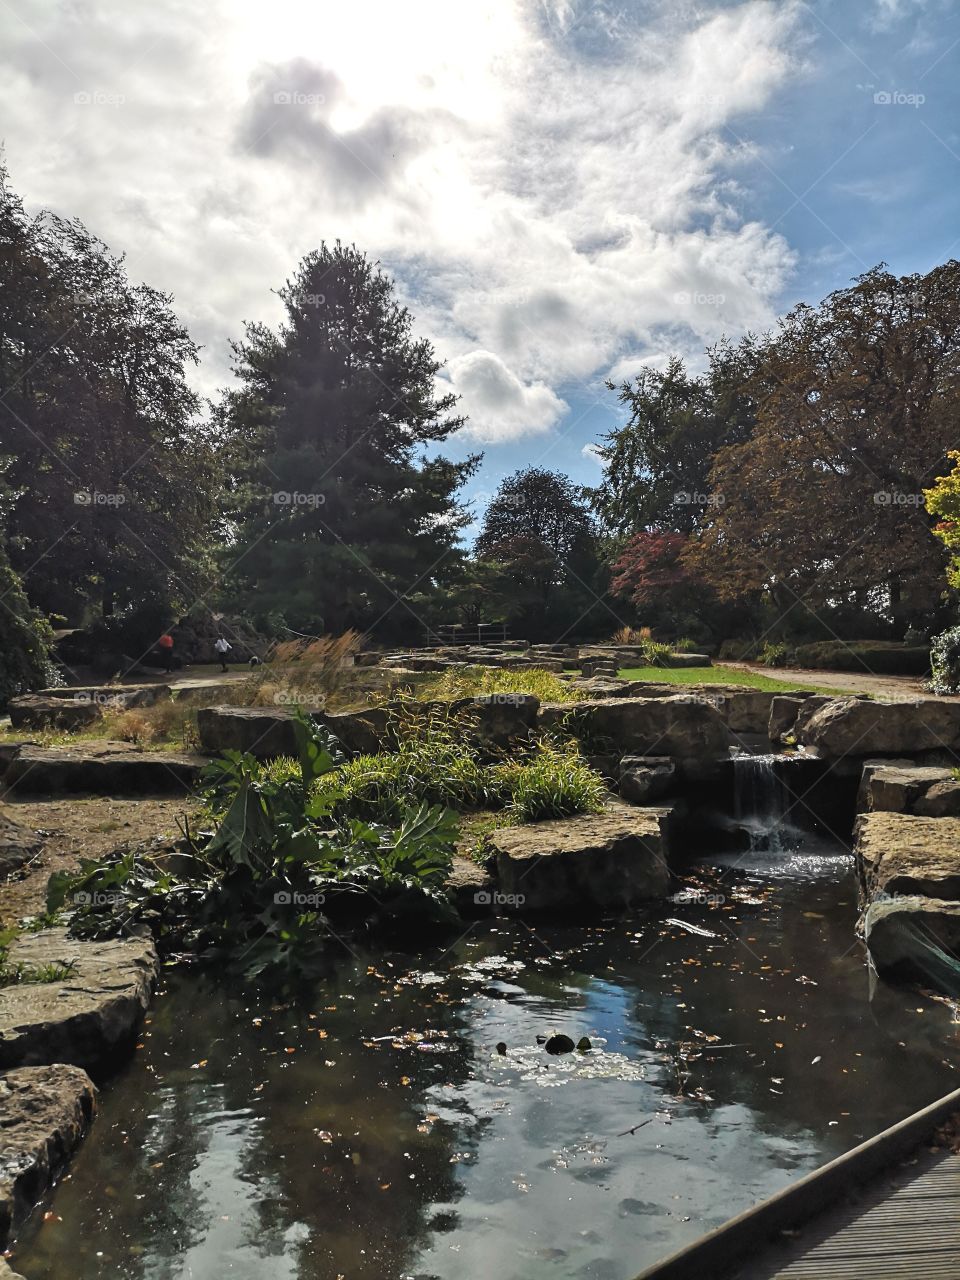 The Pond in the Park